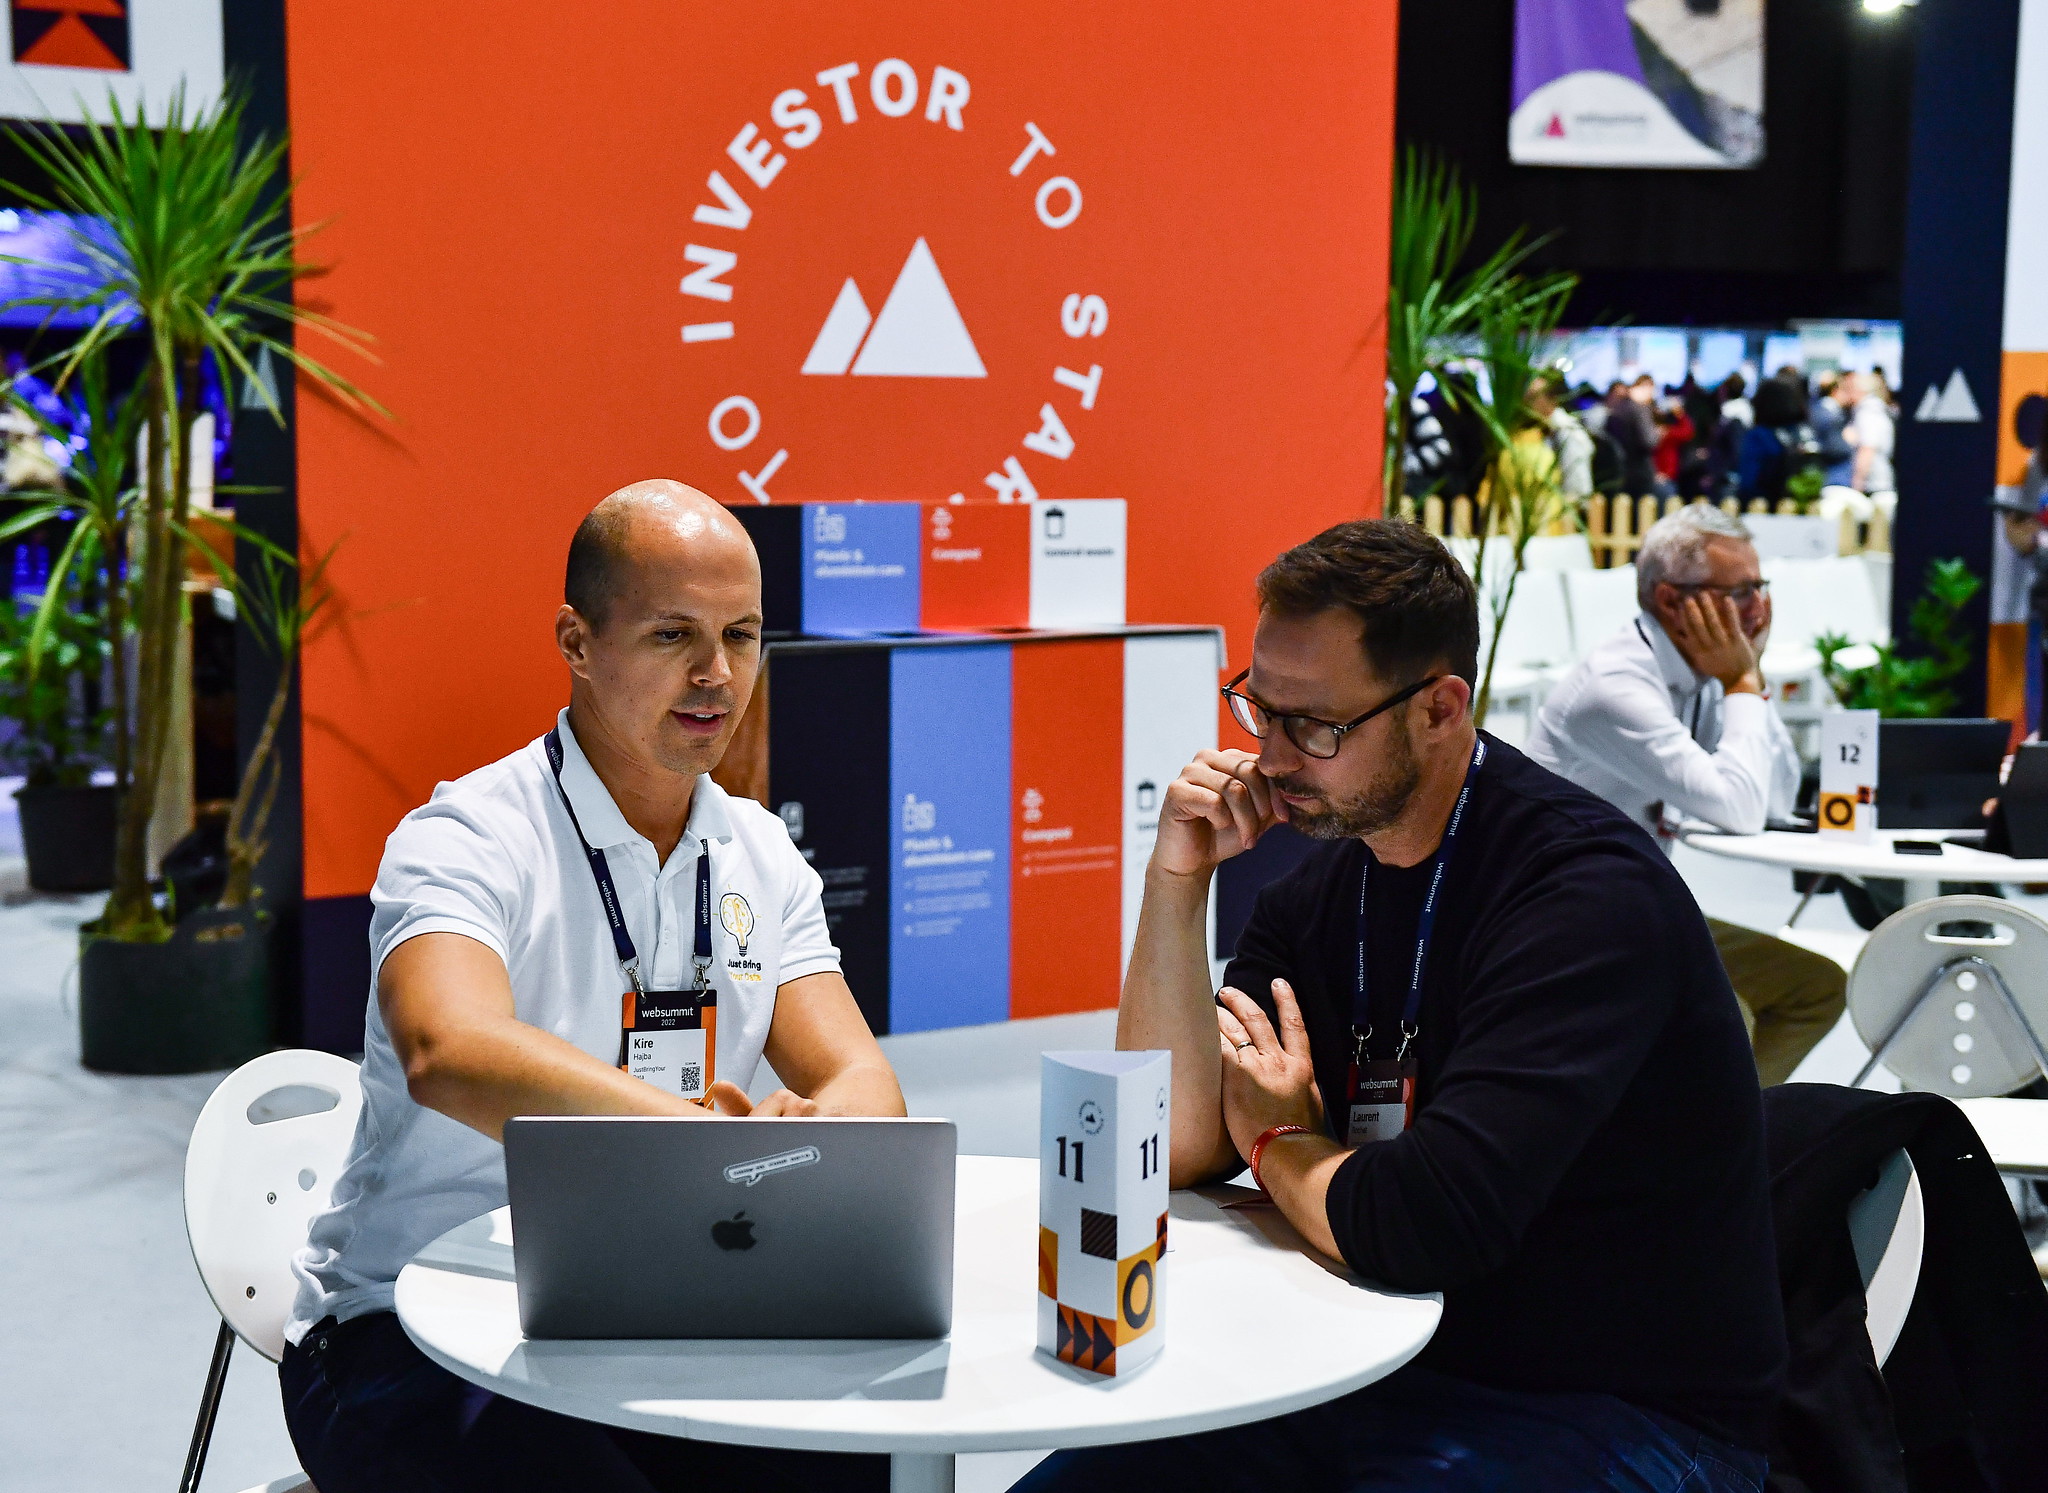 Two people sit at a round table, looking at an open laptop. One of the people is pointing to the laptop screen with their right hand, and letting their left forearm rest on the table. The other is resting their right forearm on the table, and has their right hand raised towards their mouth in a manner that suggests focus. Behind them, investor to startup is written in a circle around the Web Summit logo. Below the logo is a bank of rubbish bins. To the left of the logo is a small potted palm tree.